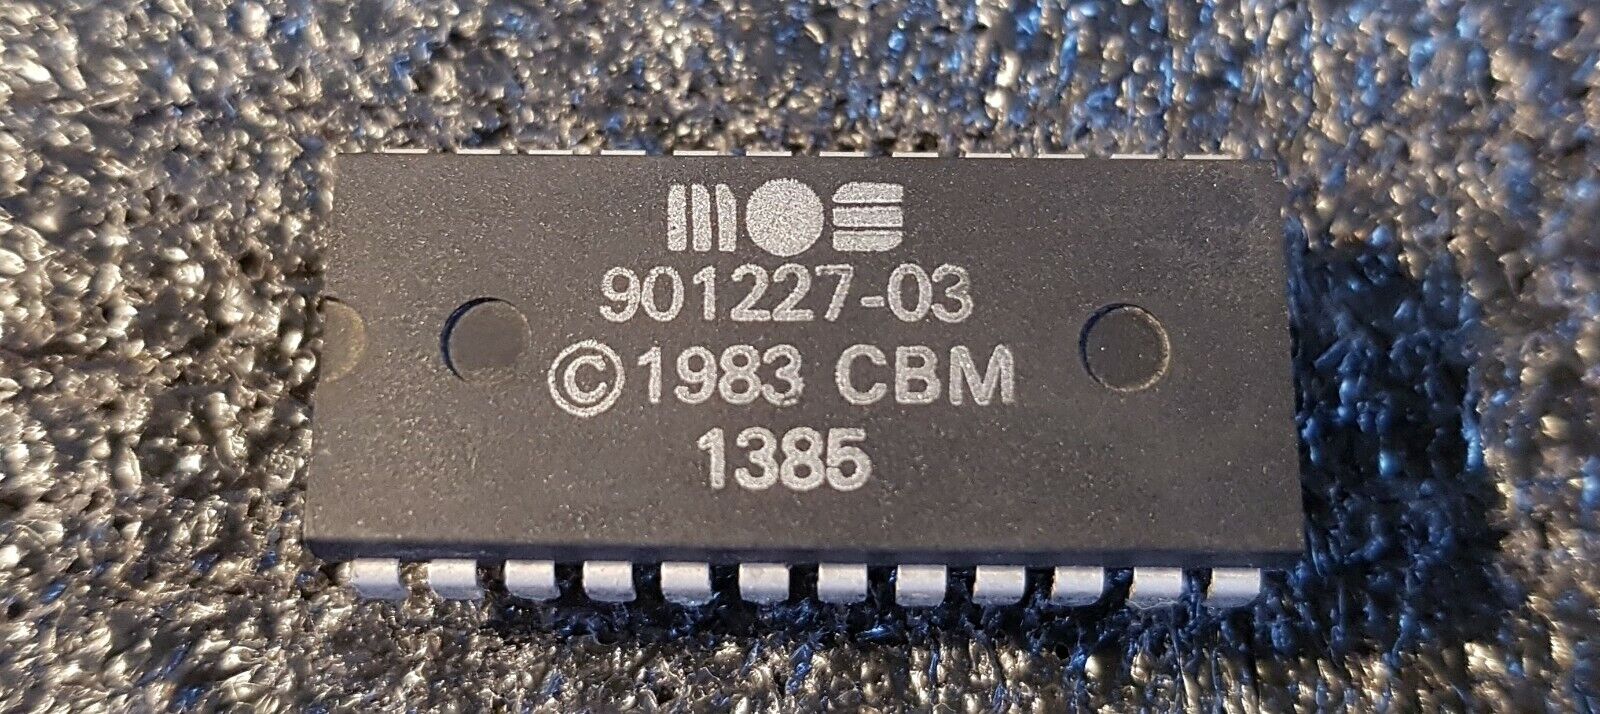 MOS 901227-03 Kernal ROM Chip for Commodore 64, Genuine part Tested & Working.